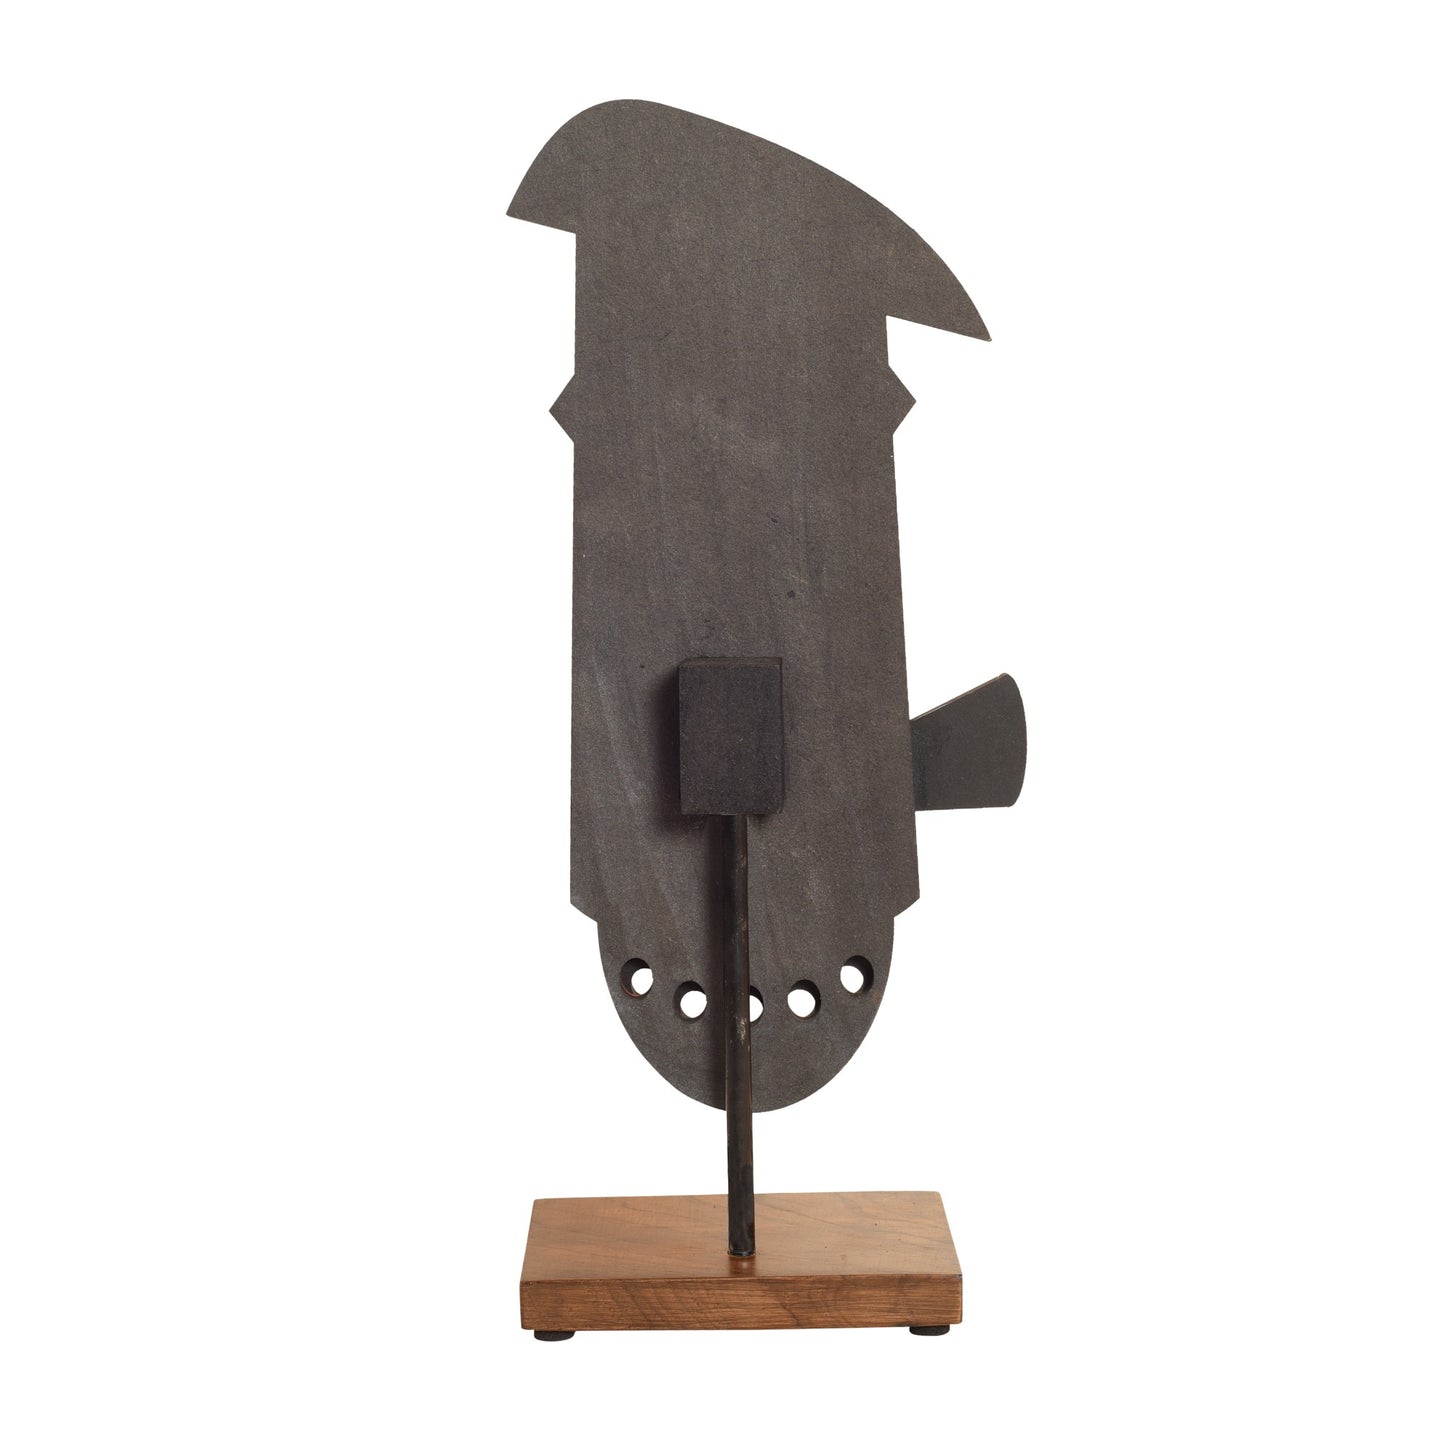 The Mob Boss Table Decor Mask Stand